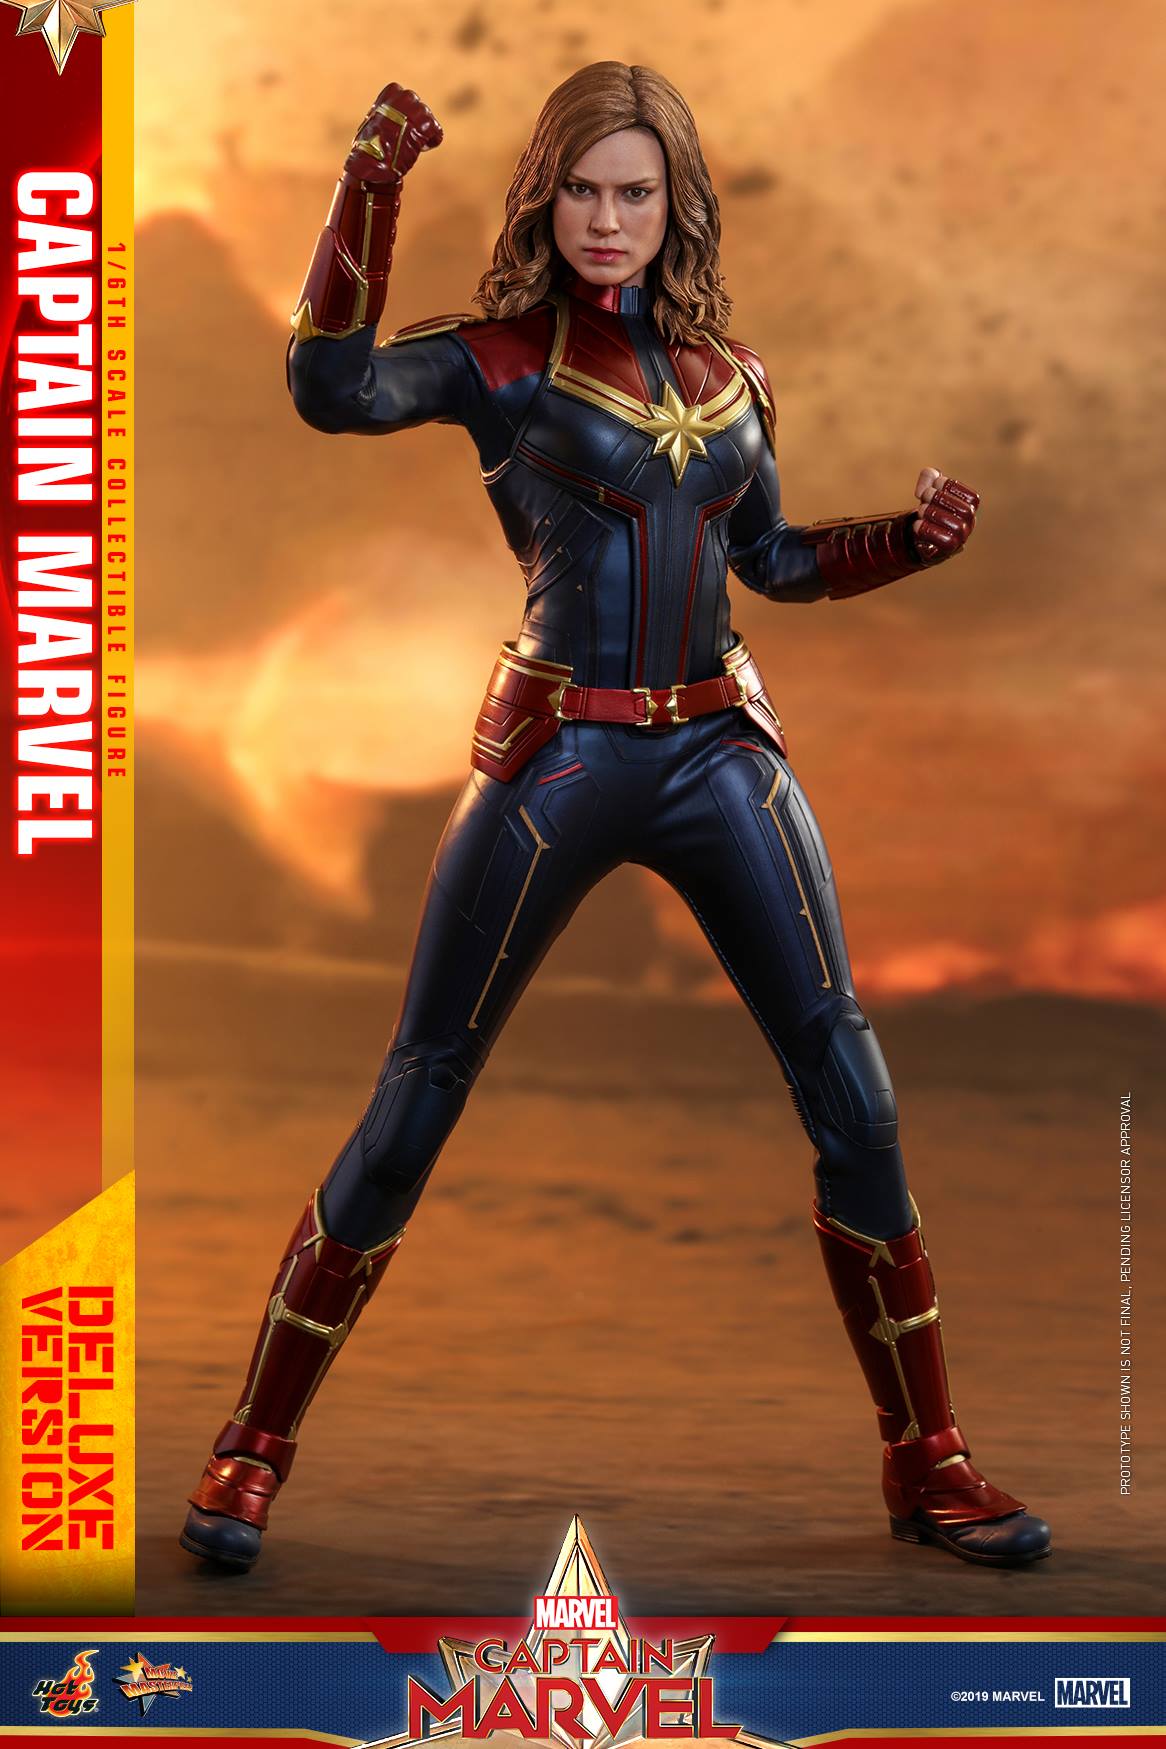 Hot Toys Marvel Captain Marvel Deluxe Sixth Scale Figure